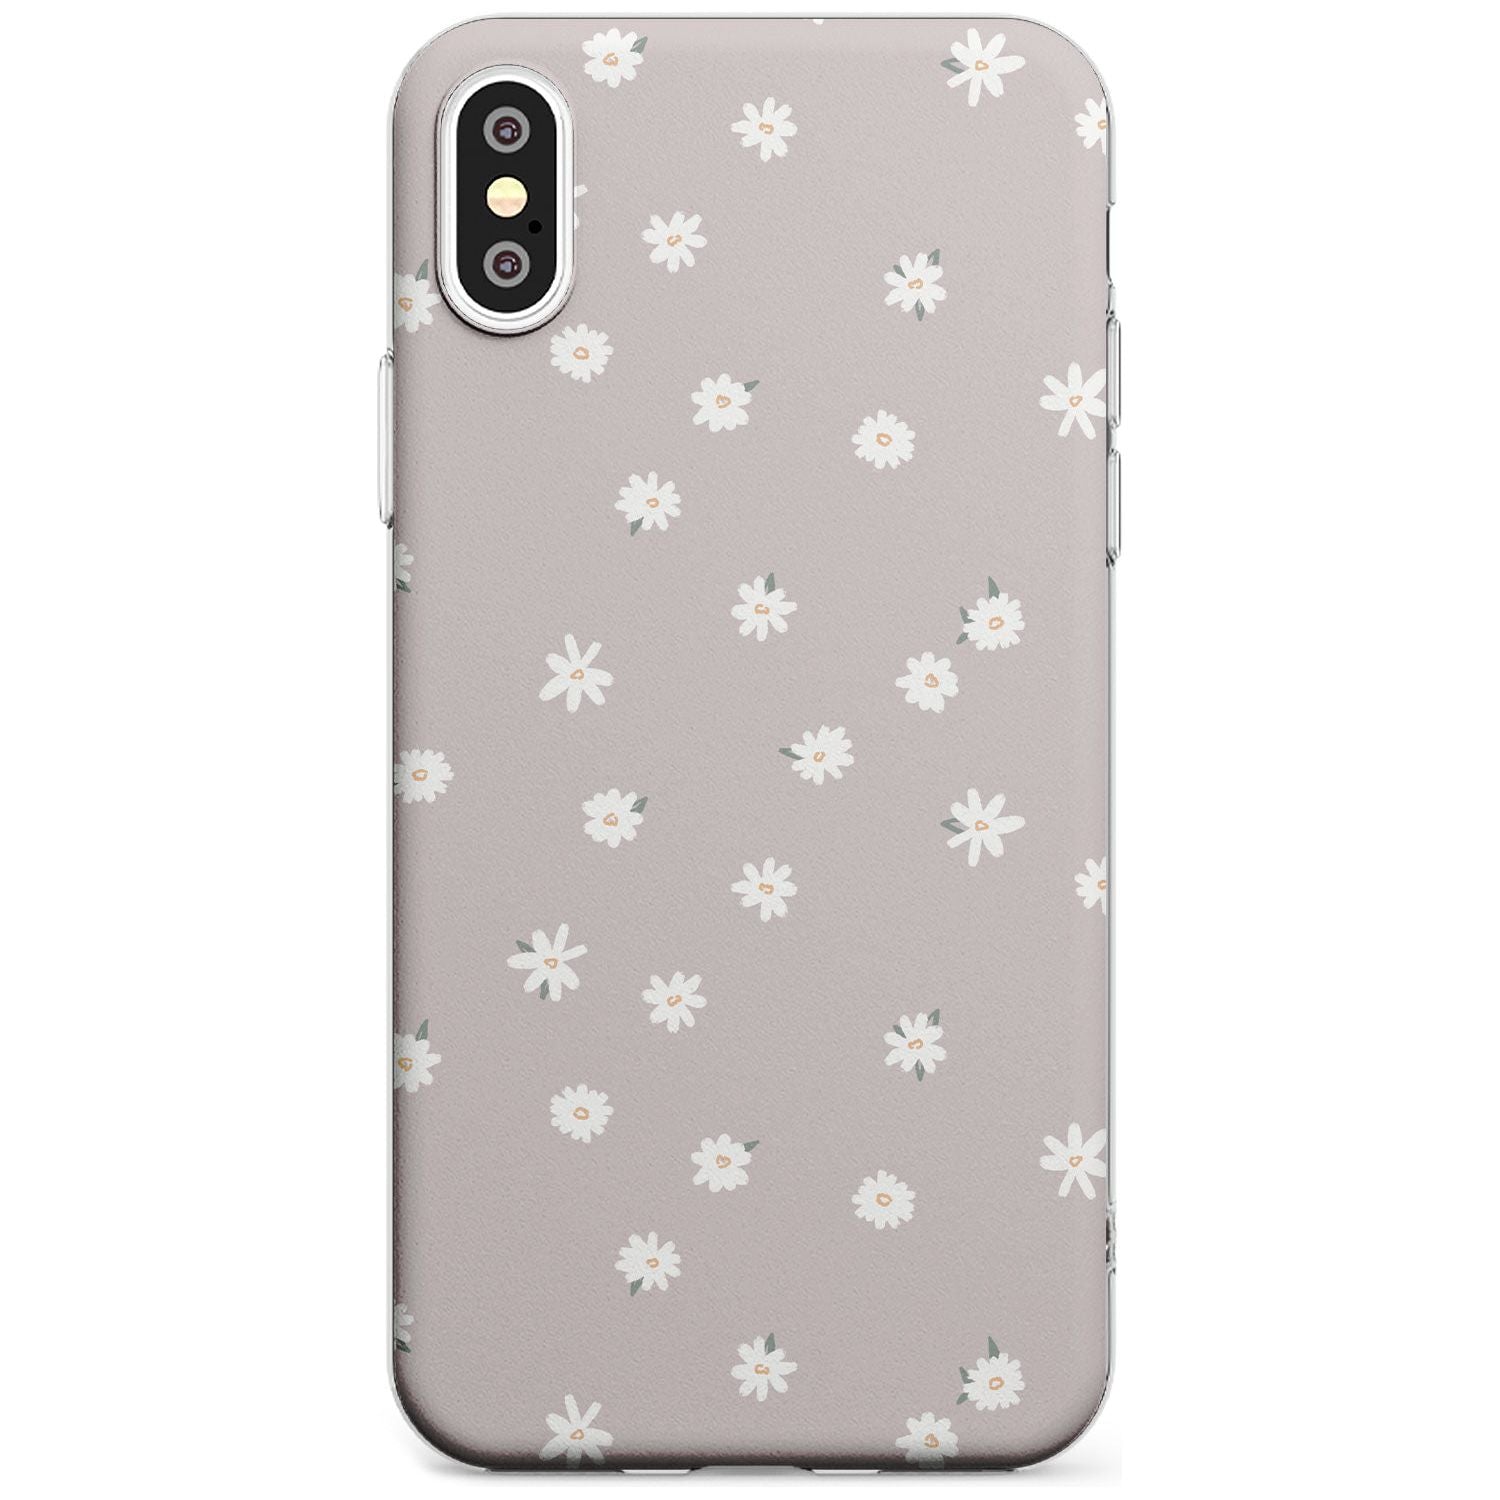 Painted Daises - Dark Pink Cute Floral Design Black Impact Phone Case for iPhone X XS Max XR